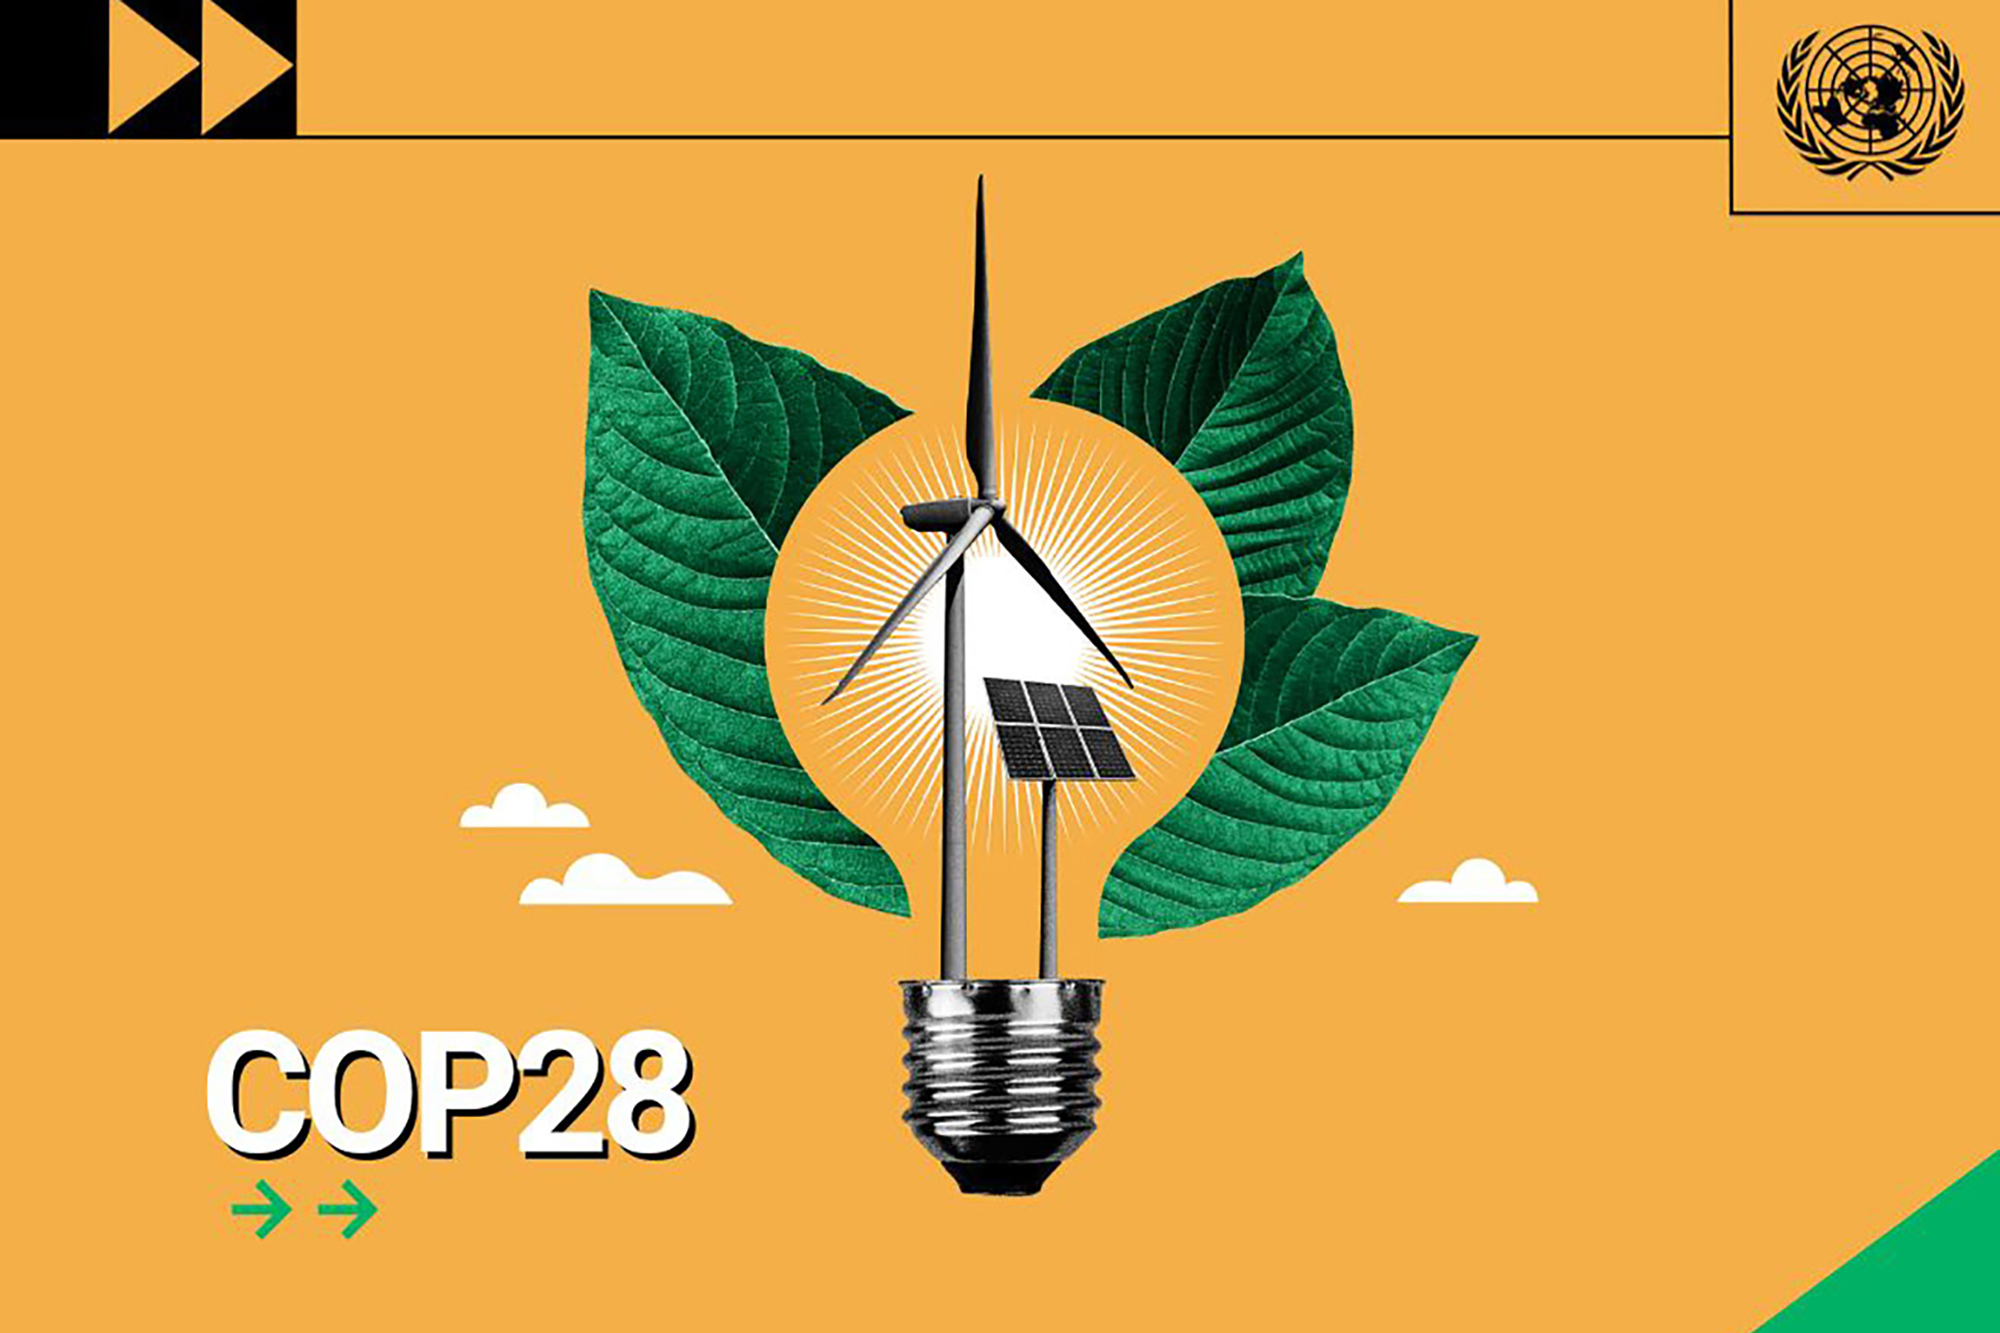 Illustration of a lightbulb with a solar panel and a wind turbine inside of it, with green leaves and small clouds in the background.